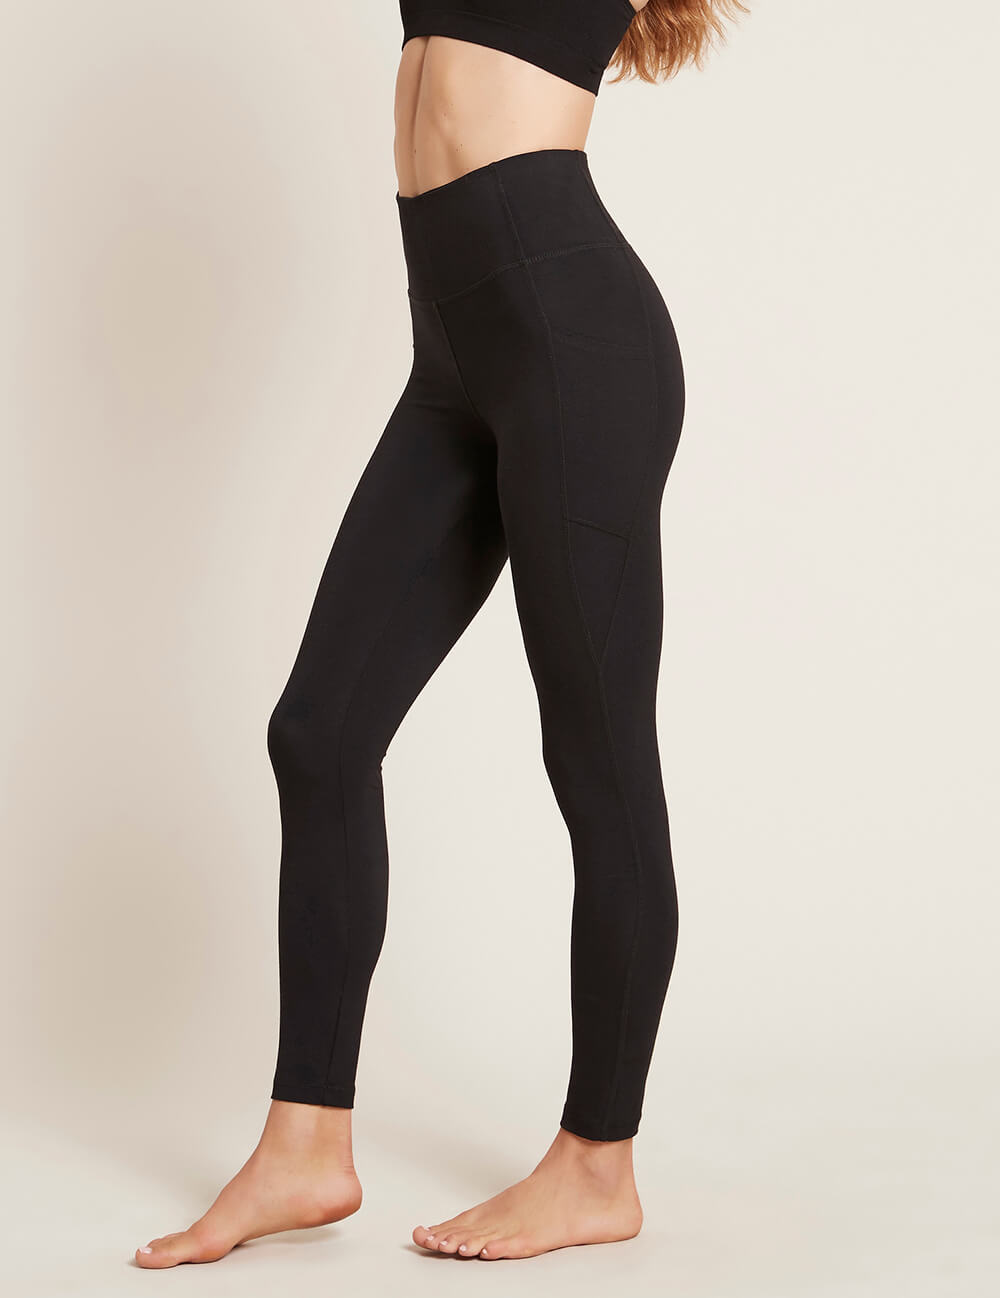 Motivate Full-Length High-Waist Tights | Workout Tights | Boody